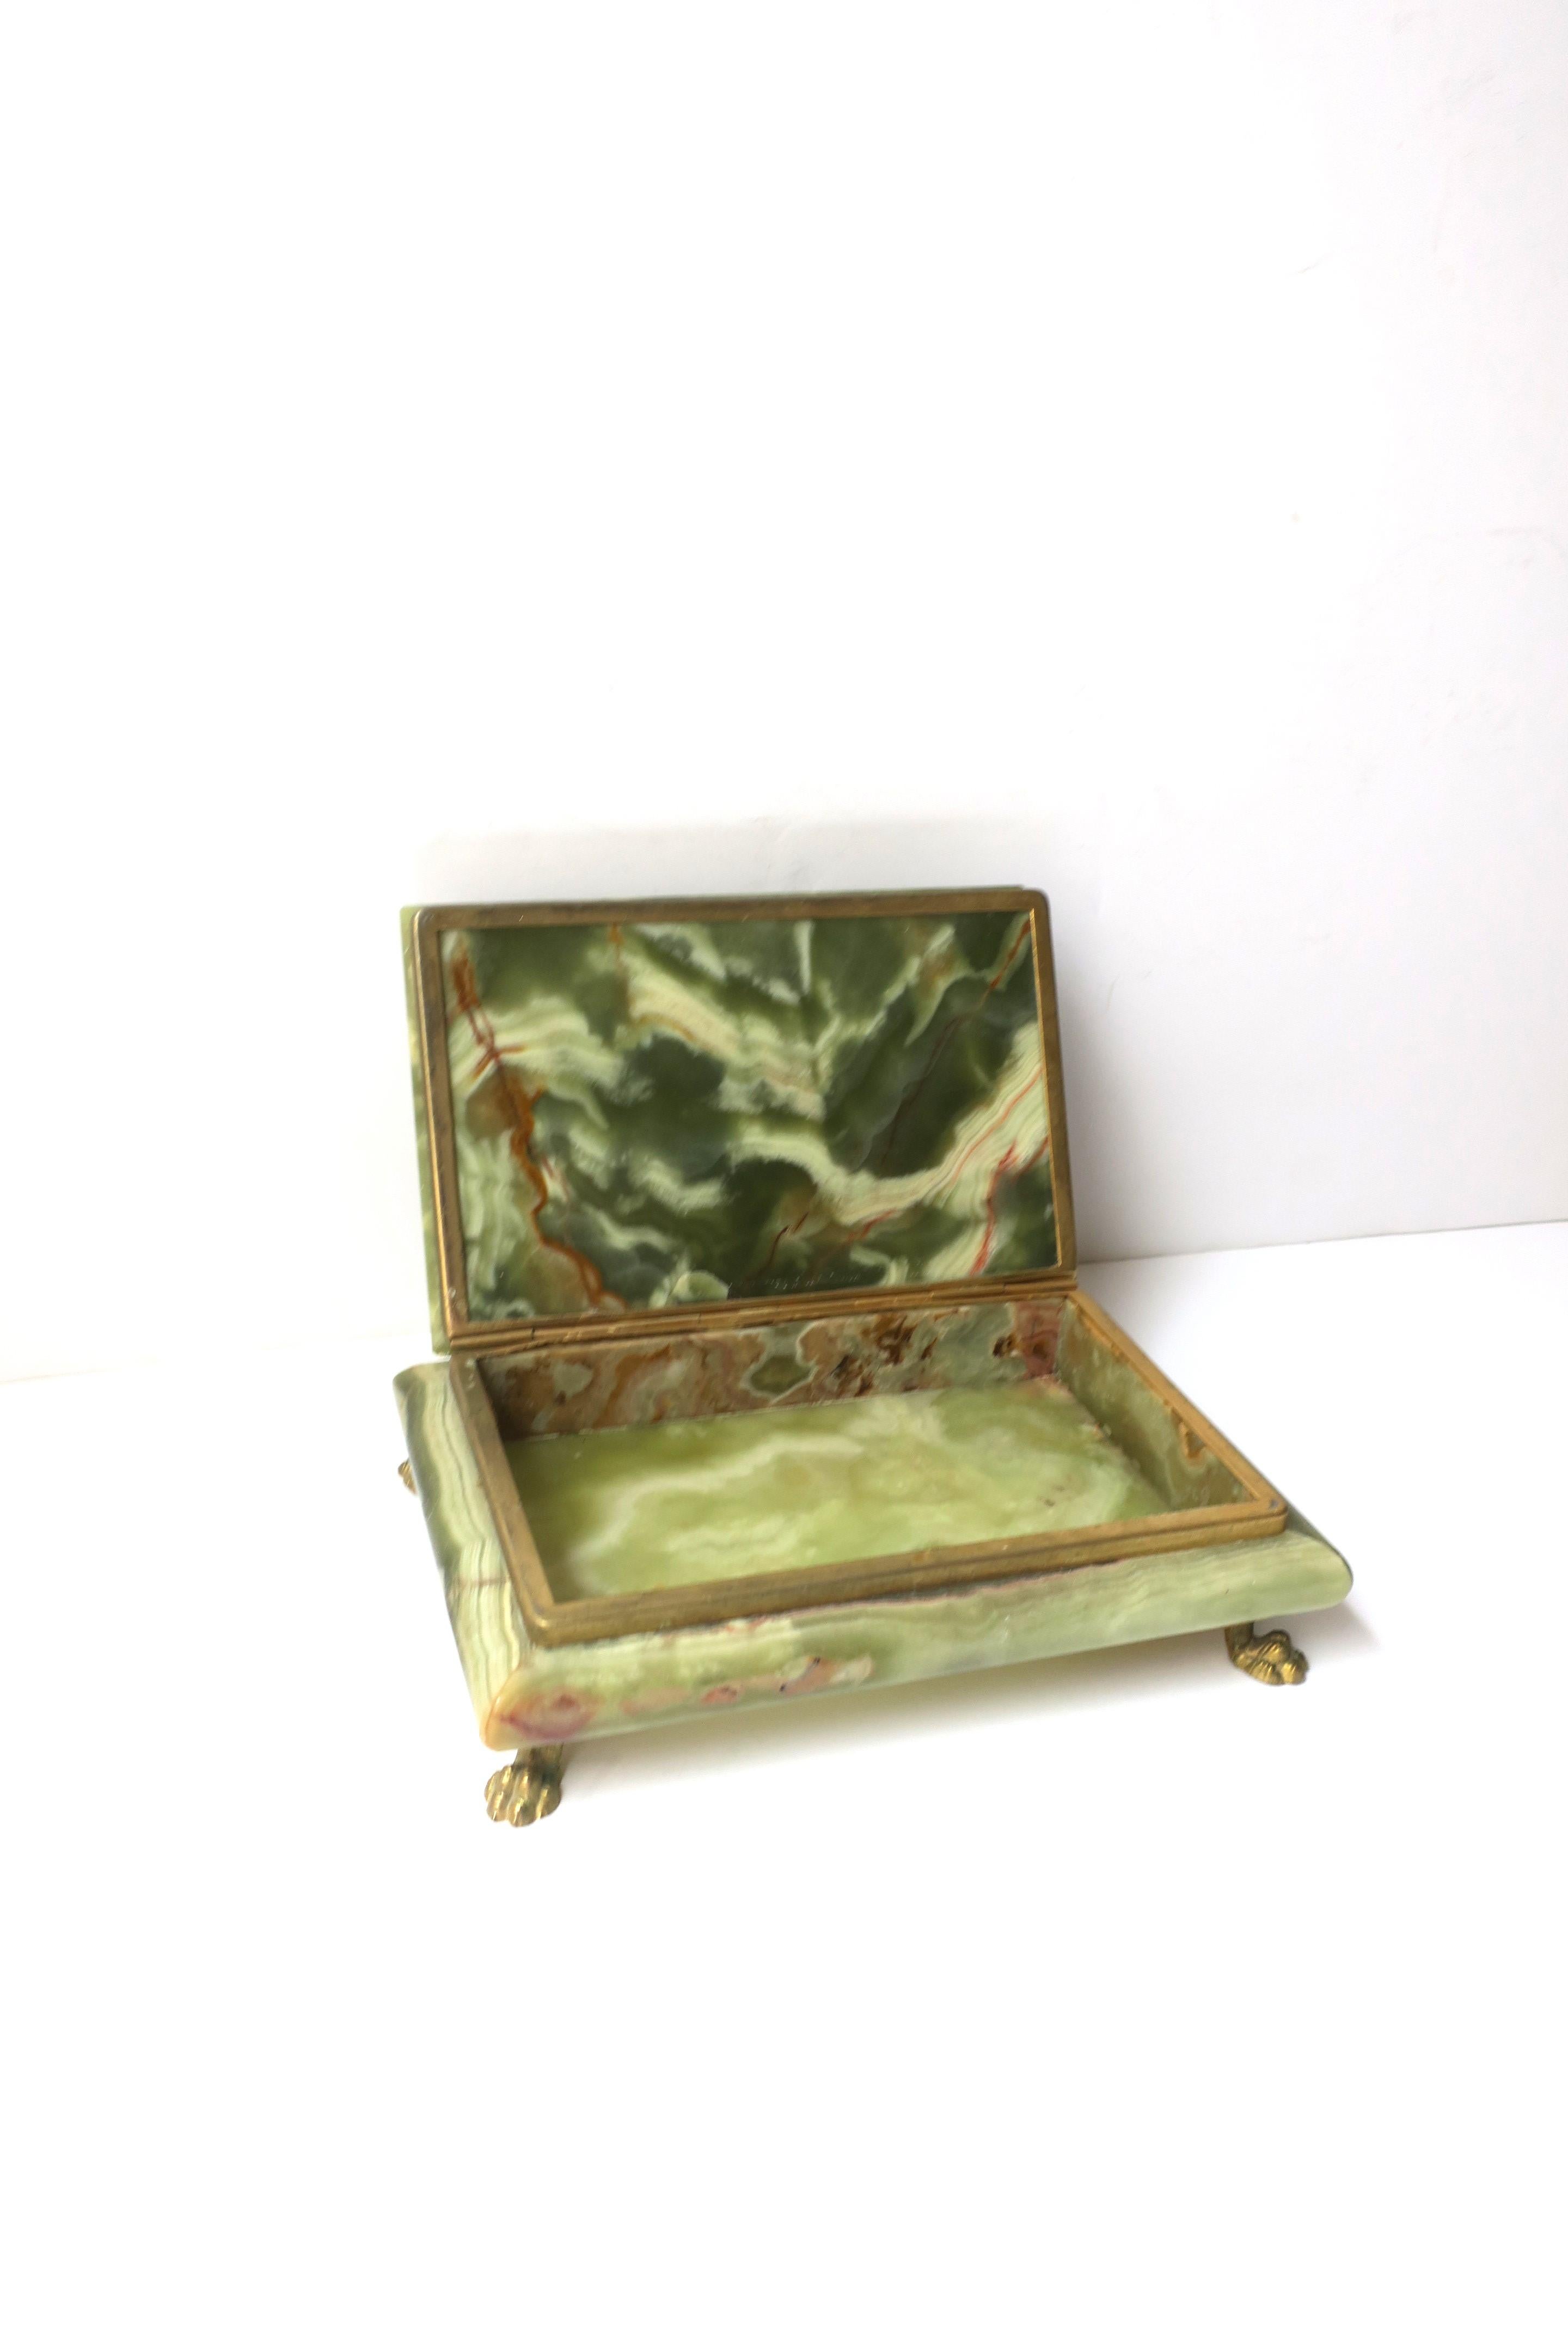 Onyx Jewelry or Decorative Box  In Good Condition For Sale In New York, NY